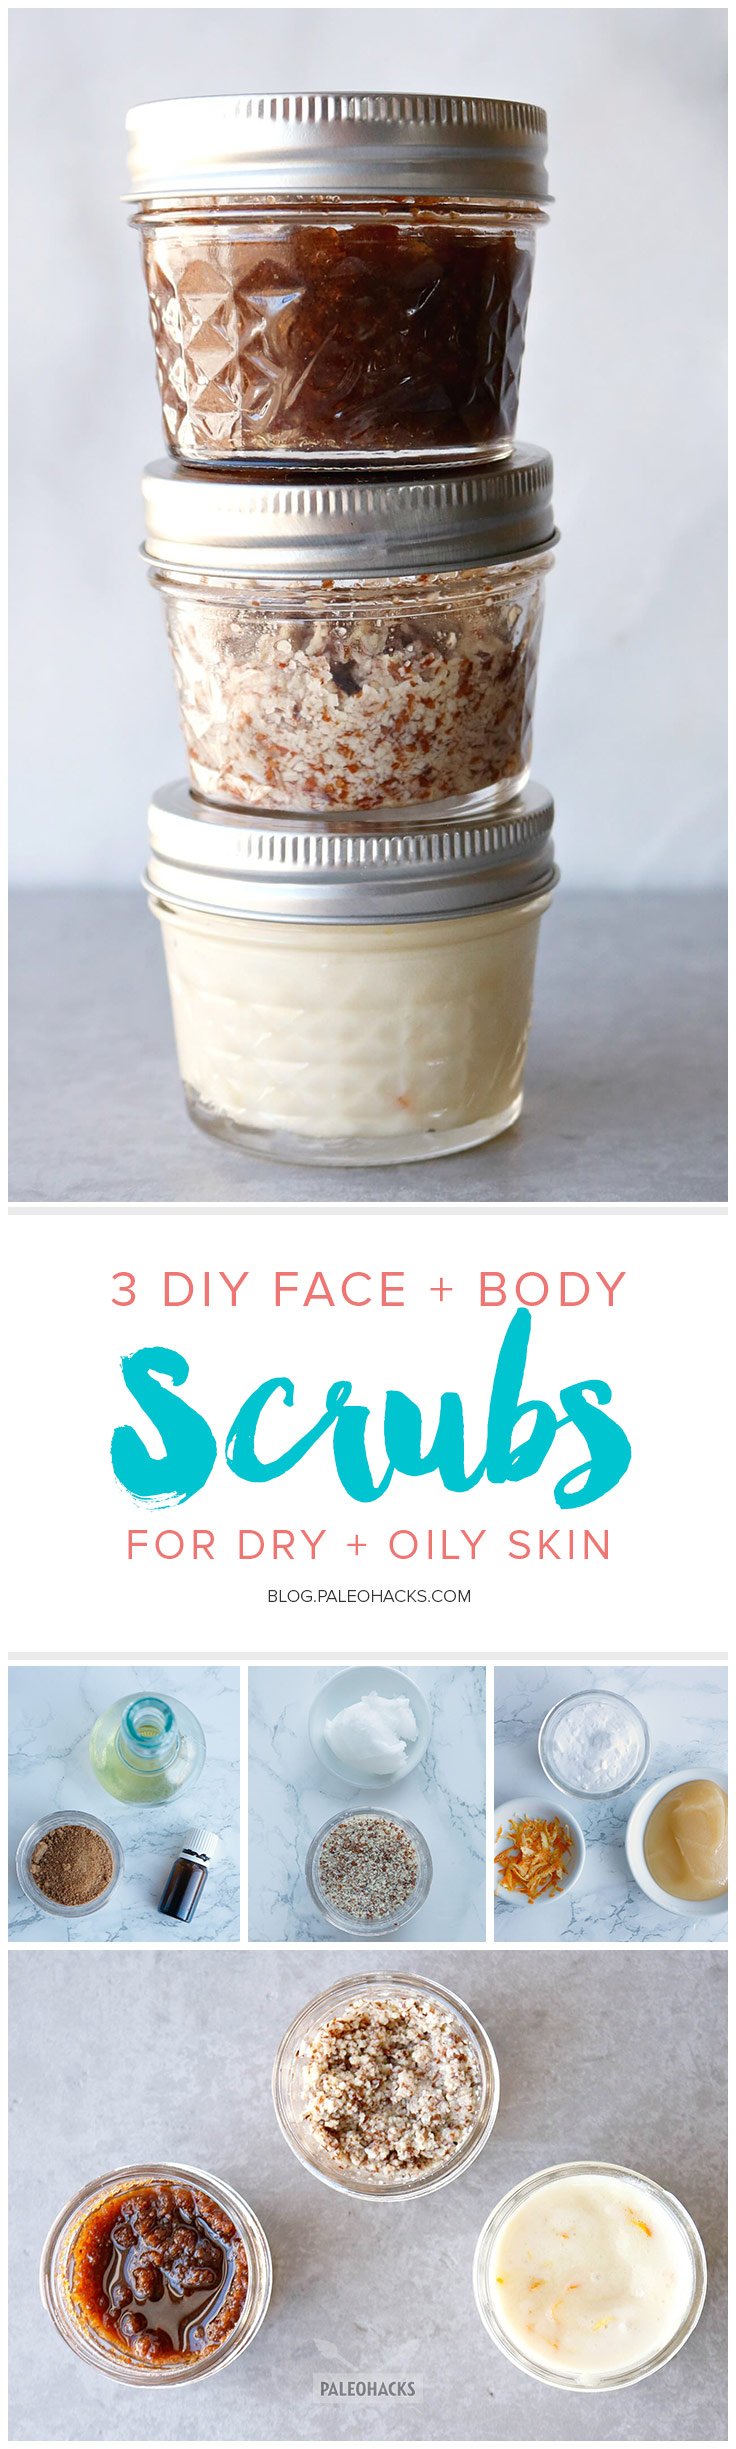 Gentle and effective, these DIY face and body scrubs will leave your skin smooth and glowing.